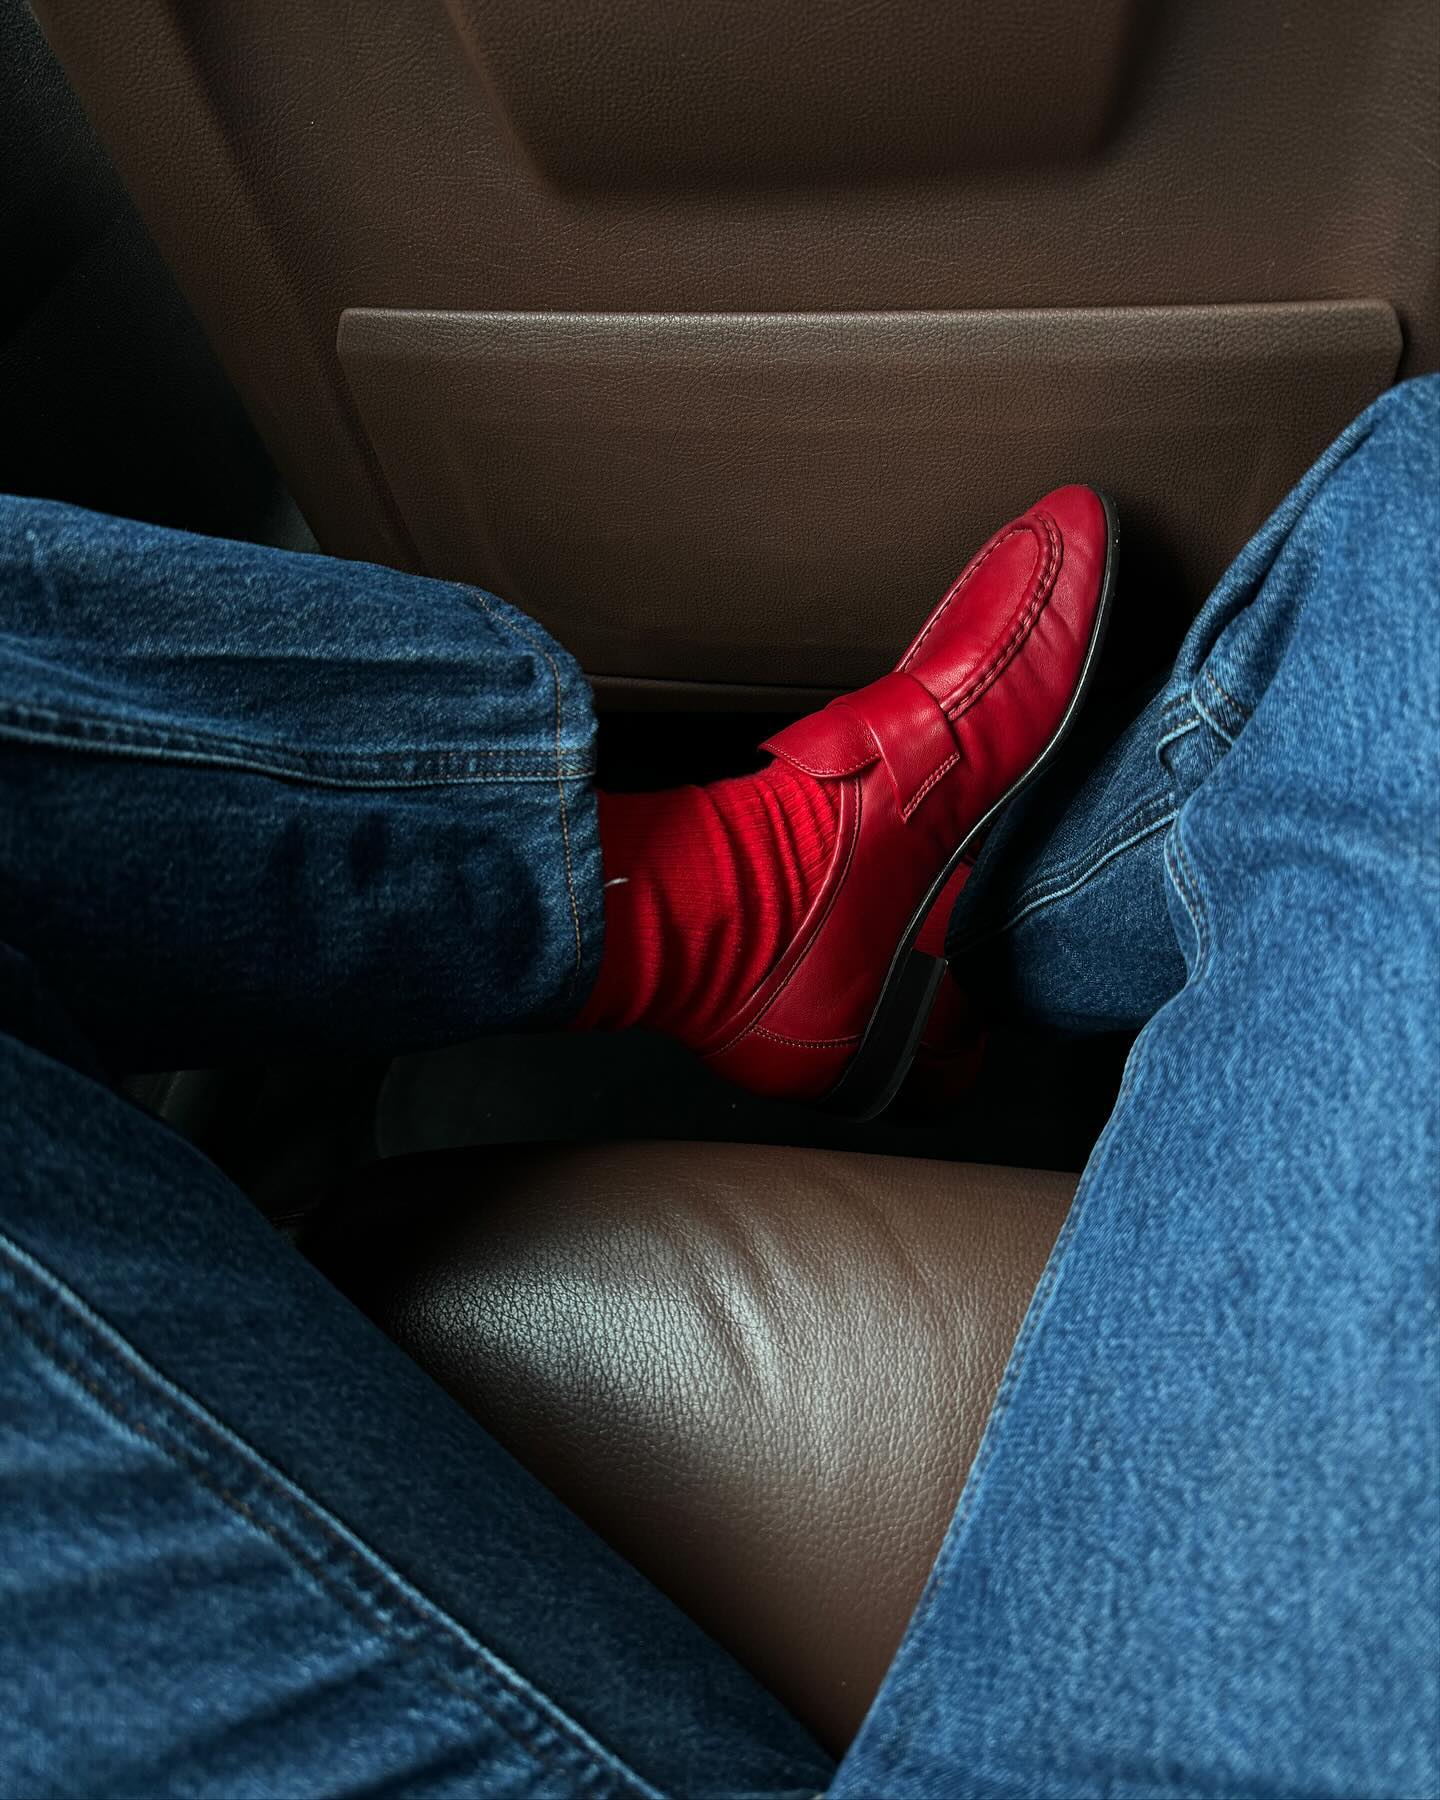 photo of influencer Lucy Williams's legs and feet in a car wearing jeans, red socks, and ATP Atelier red loafers